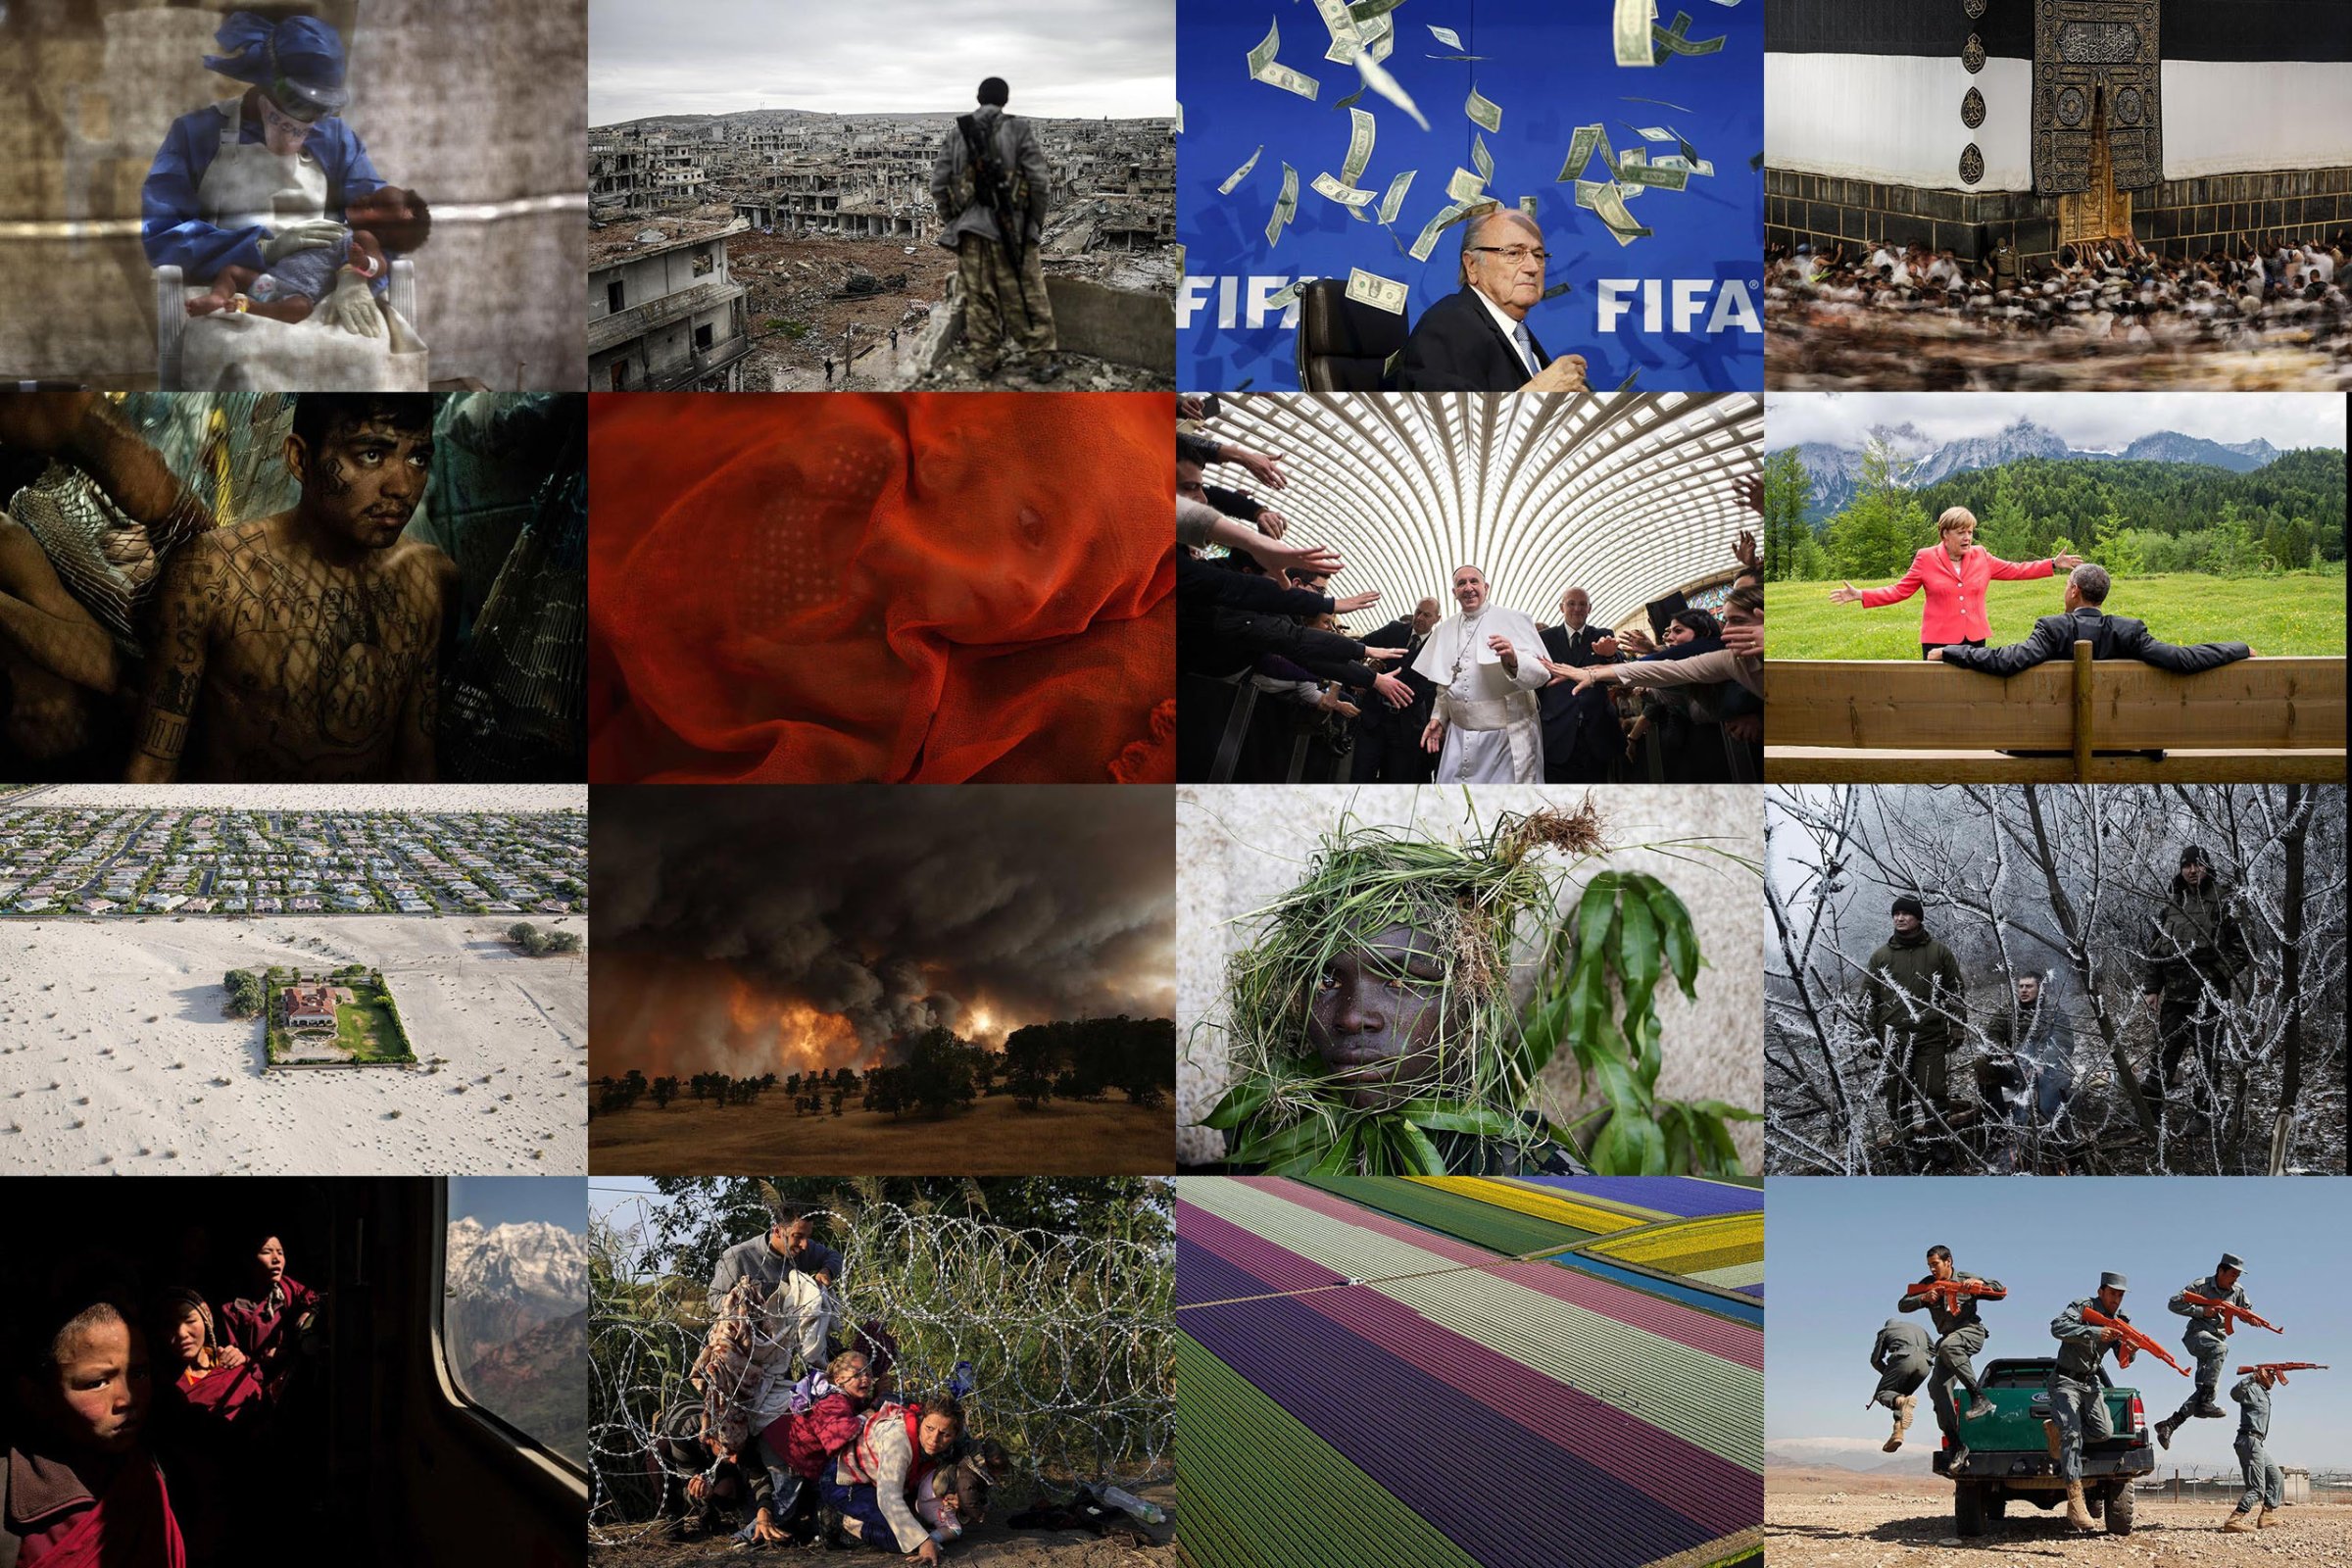 TIME Picks the Top 100 Photos of 2015